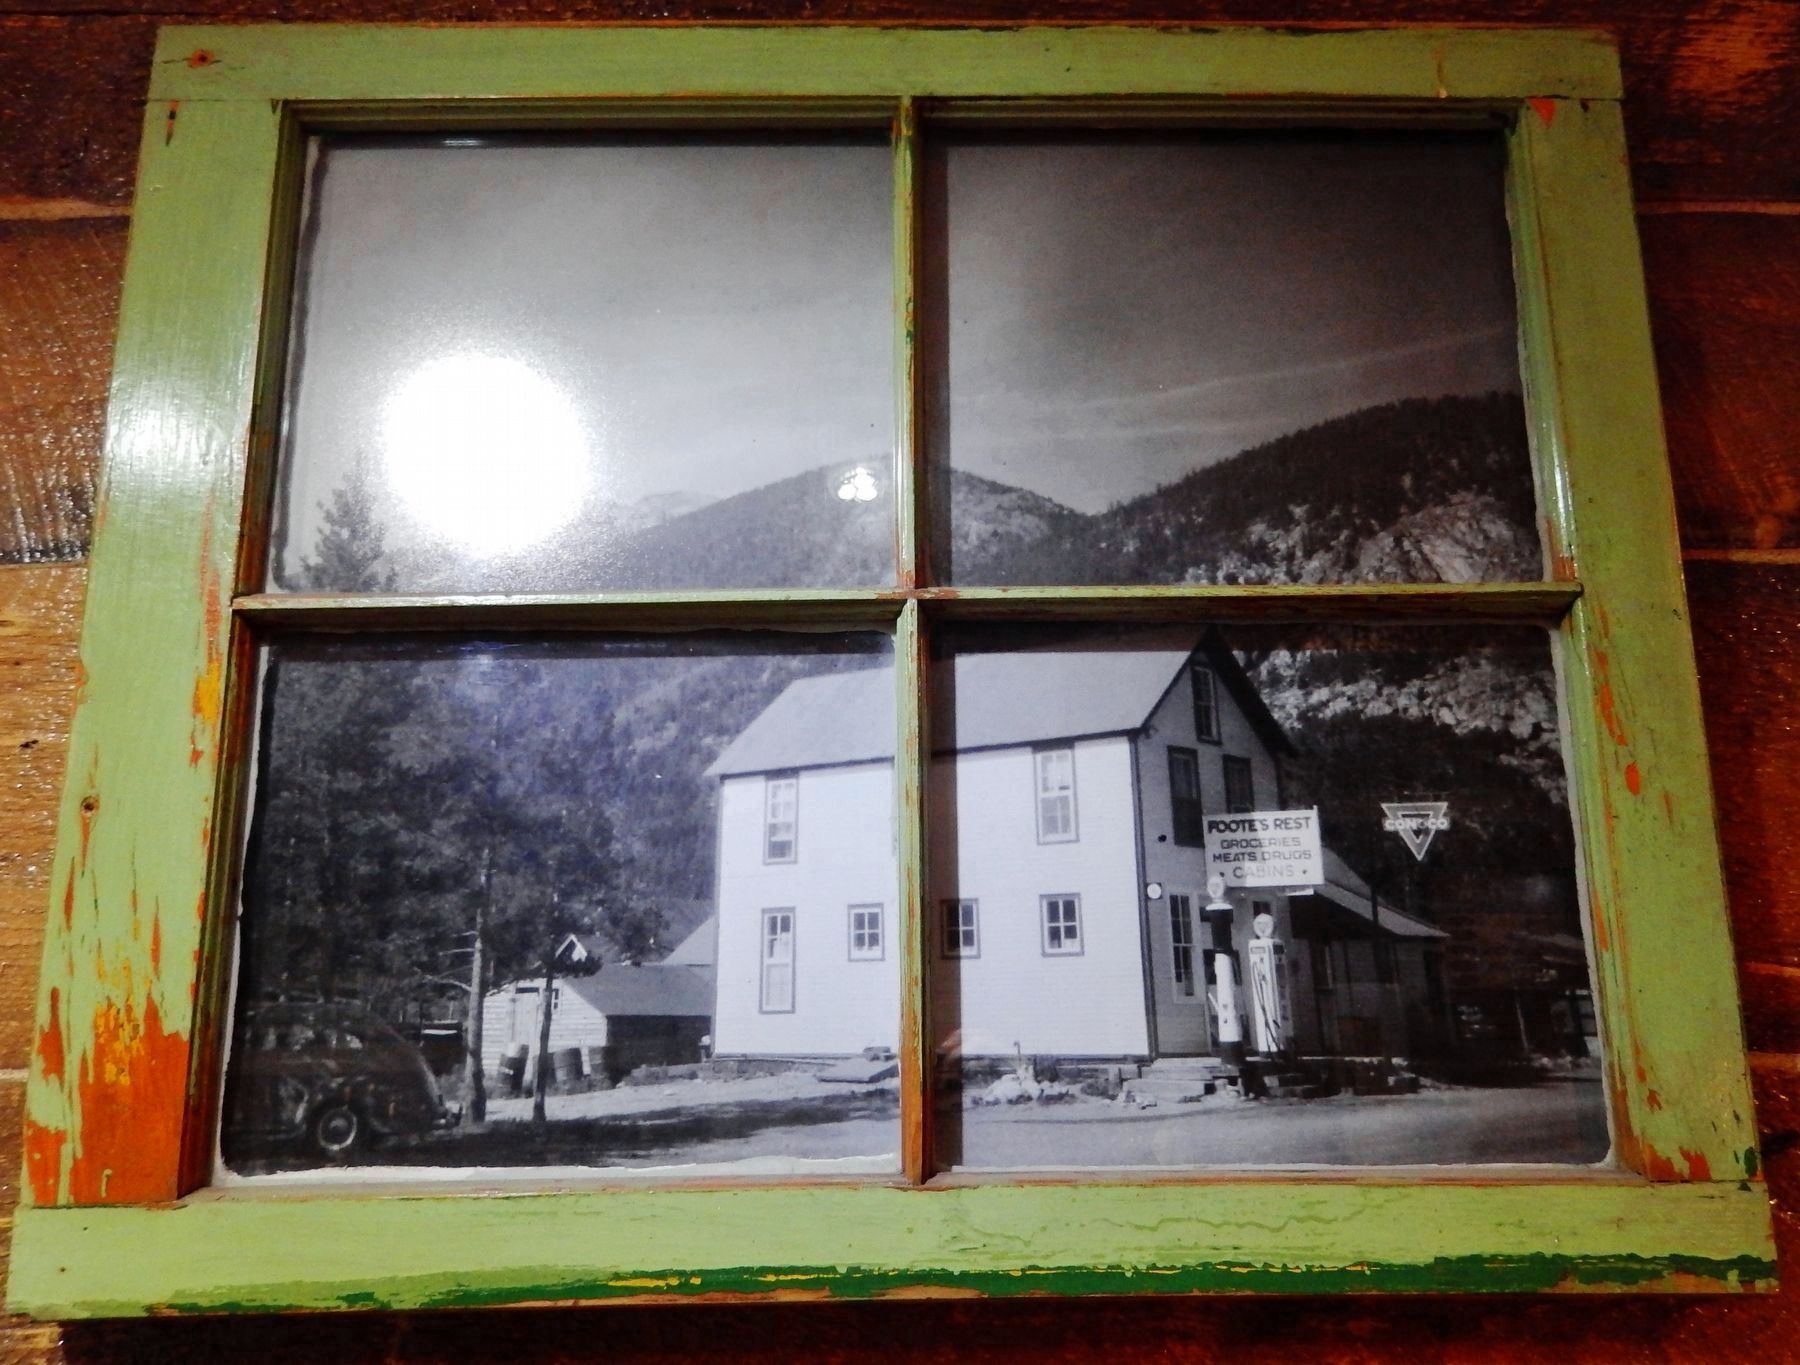 Photo of Foote's Rest circa 1950 (on display inside store) image. Click for full size.